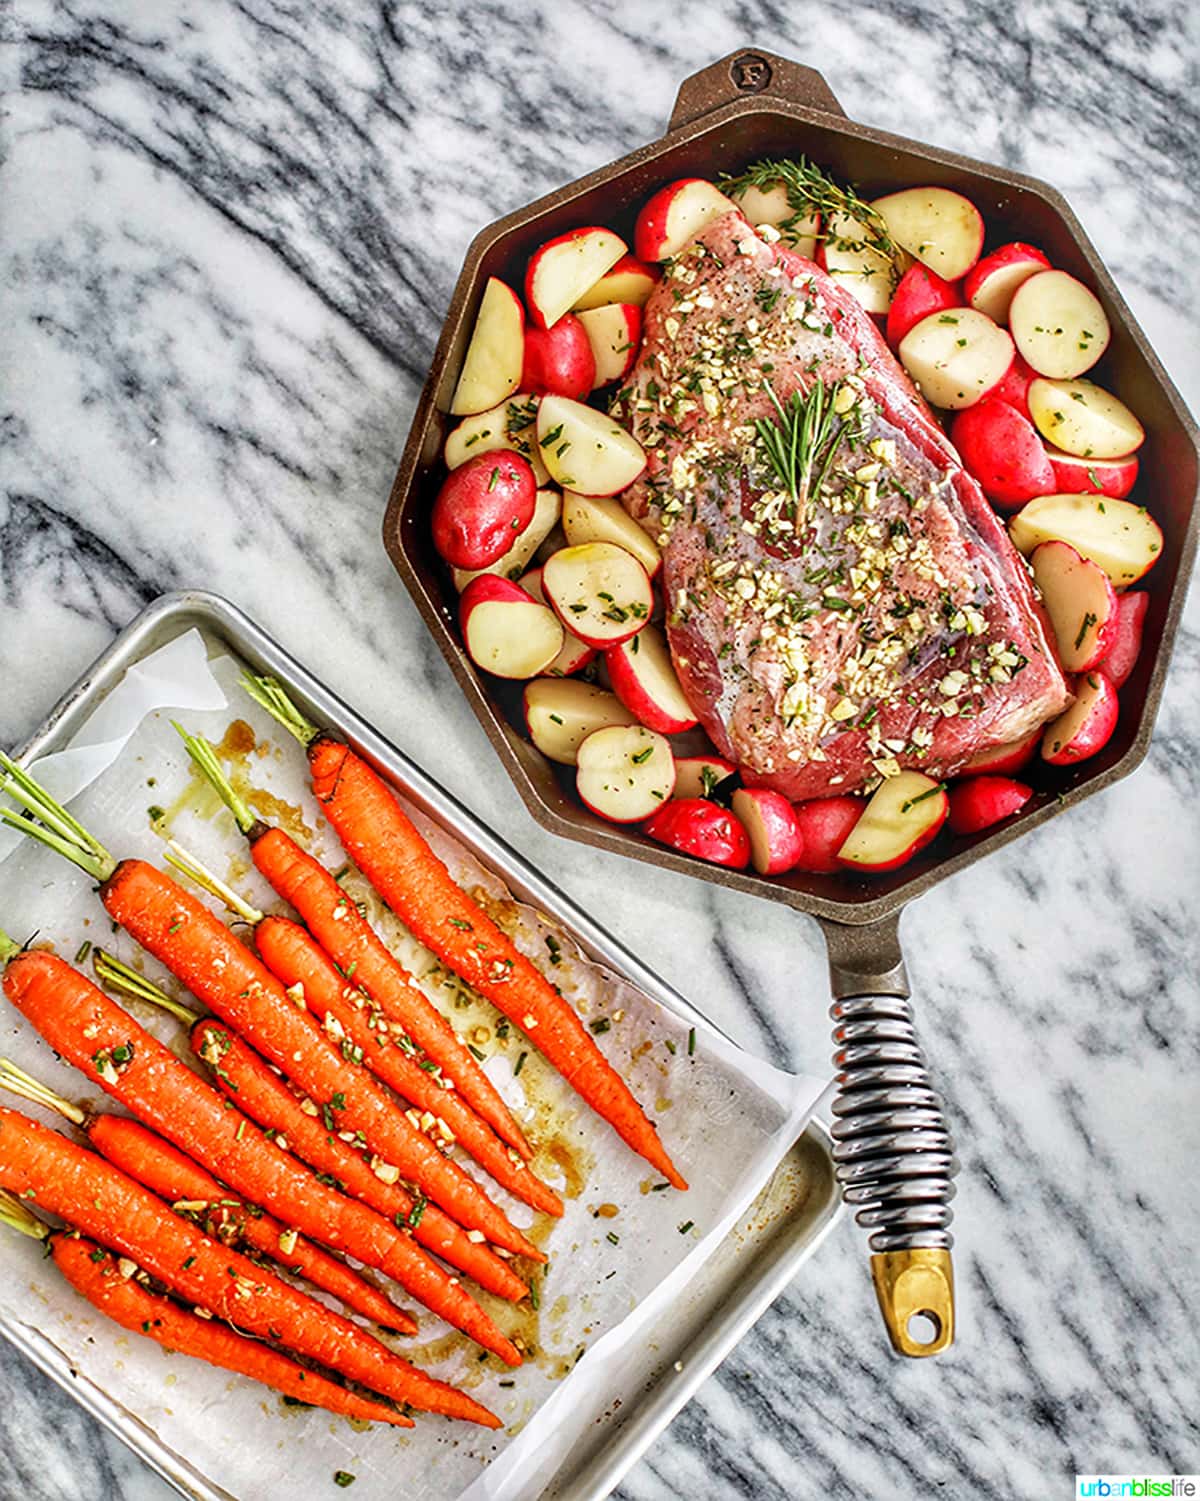 carrots in a baking sheet and beef roast and potatoes in a cast iron skillet